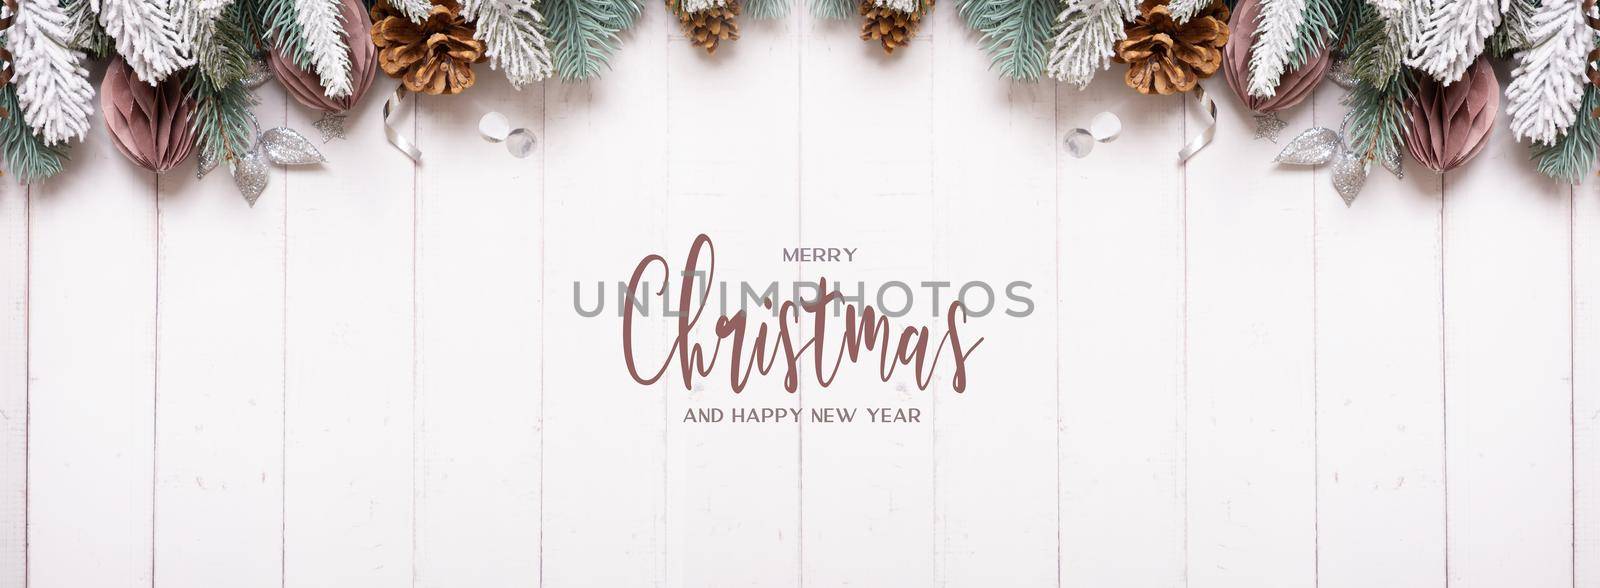 Merry Christmas and Happy New Year text greeting banner with flat lay composition from pine, cones, balls on wooden by ssvimaliss